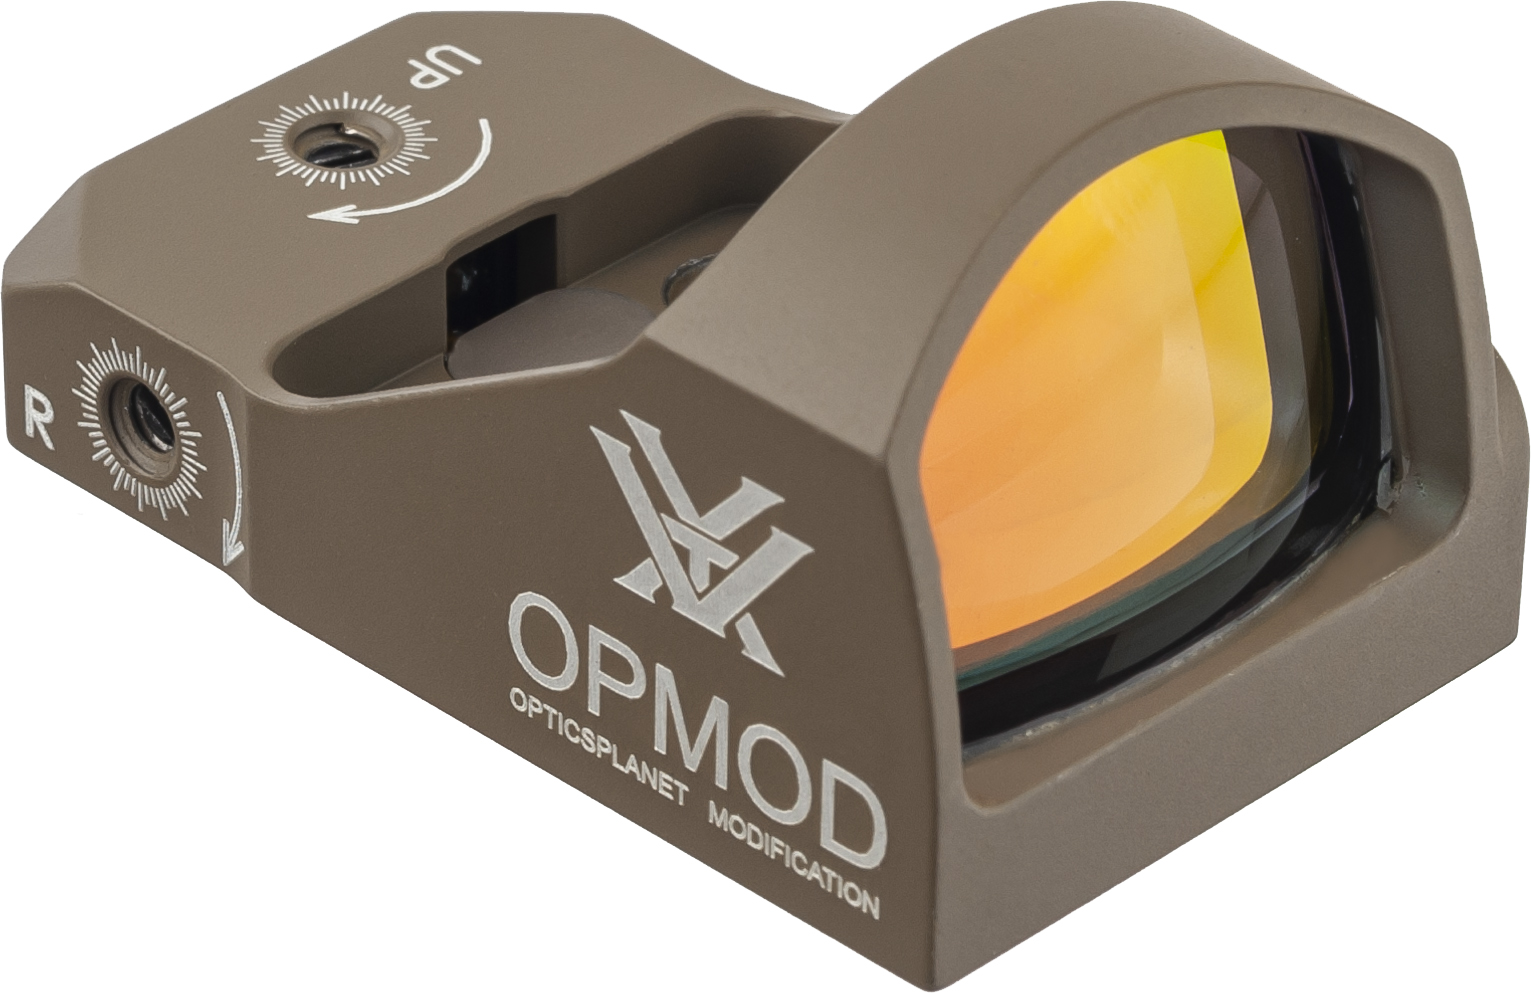 Viper 1x24mm MOA Red Dot Sight | 4.3 Star Rating w/ Free S&H